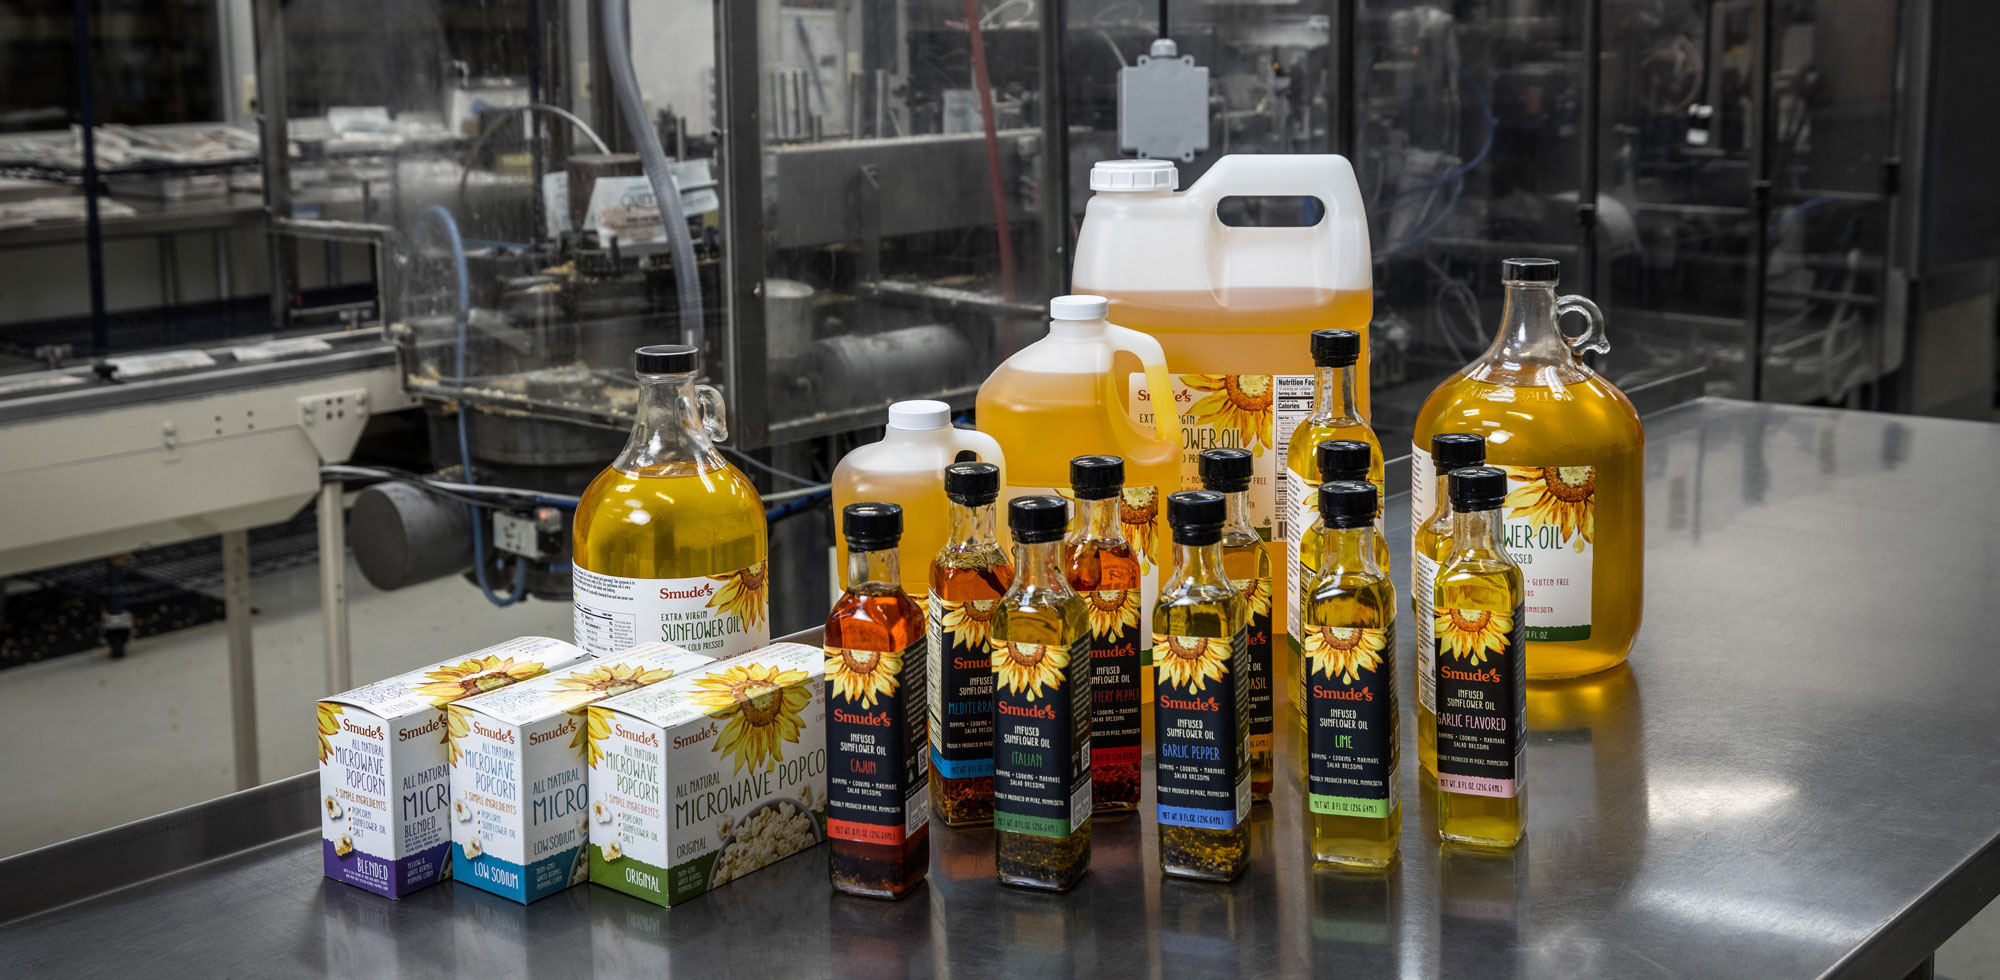 Smudes Sunflower Oil products